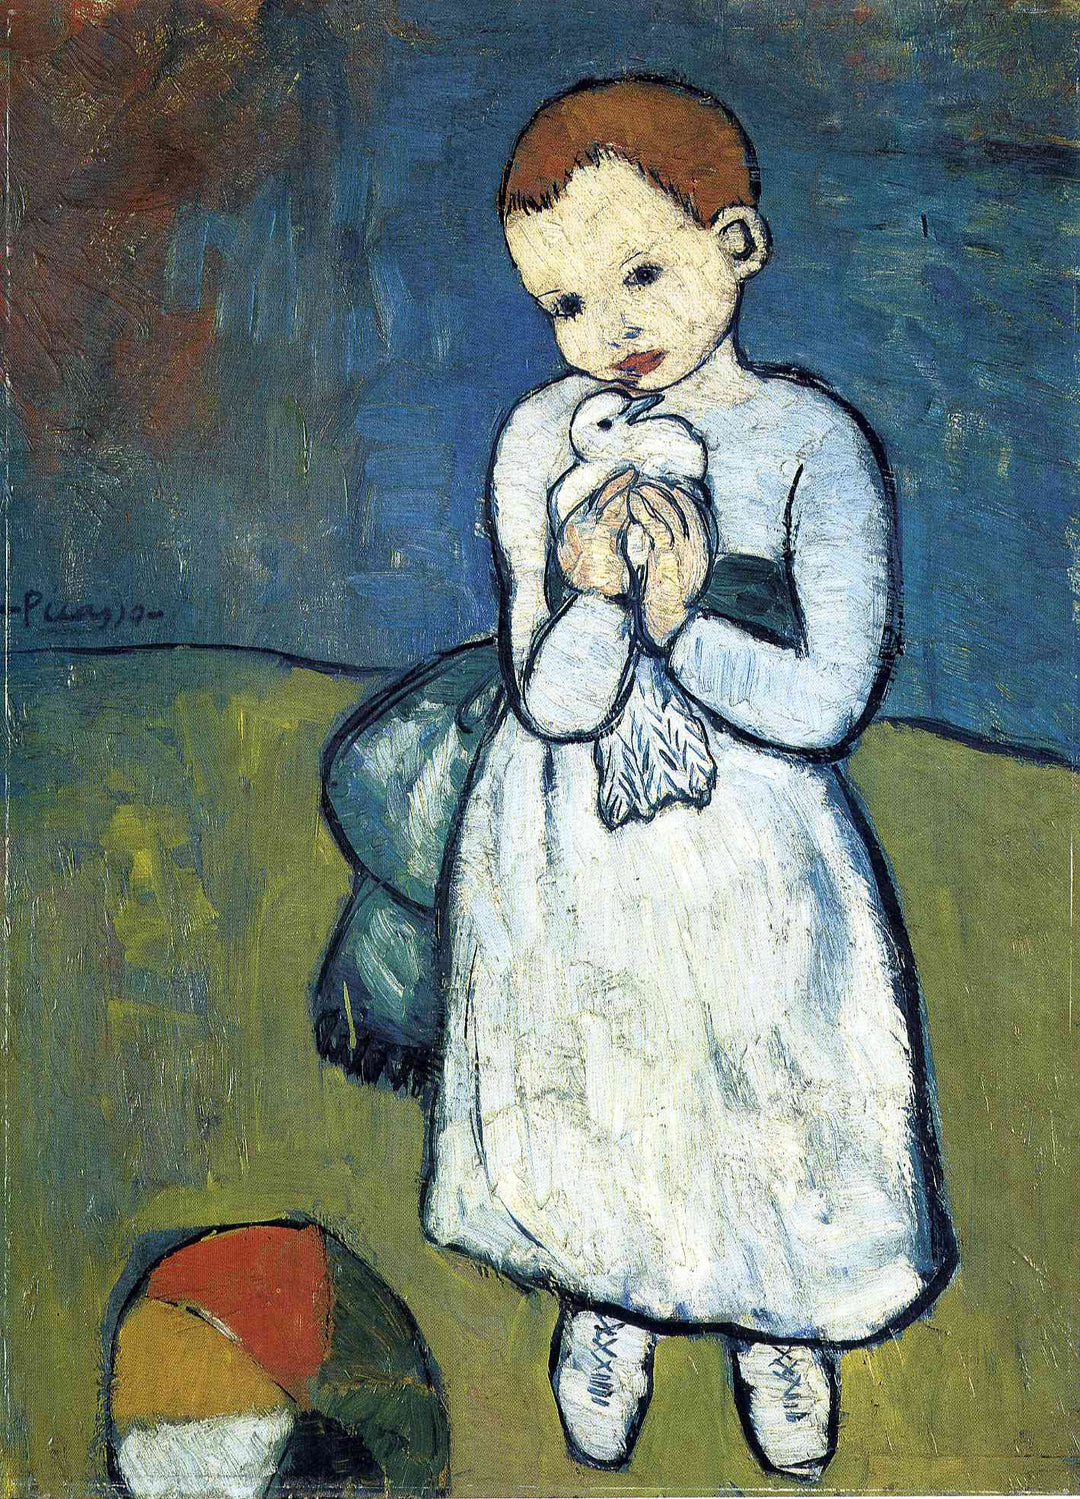 Child with dove by Pablo Picasso. Picasso artworks, Picasso wall art, Picasso canvas art, Picasso reproduction for sale, Picasso oil painting on canvas, Blue Surf Art